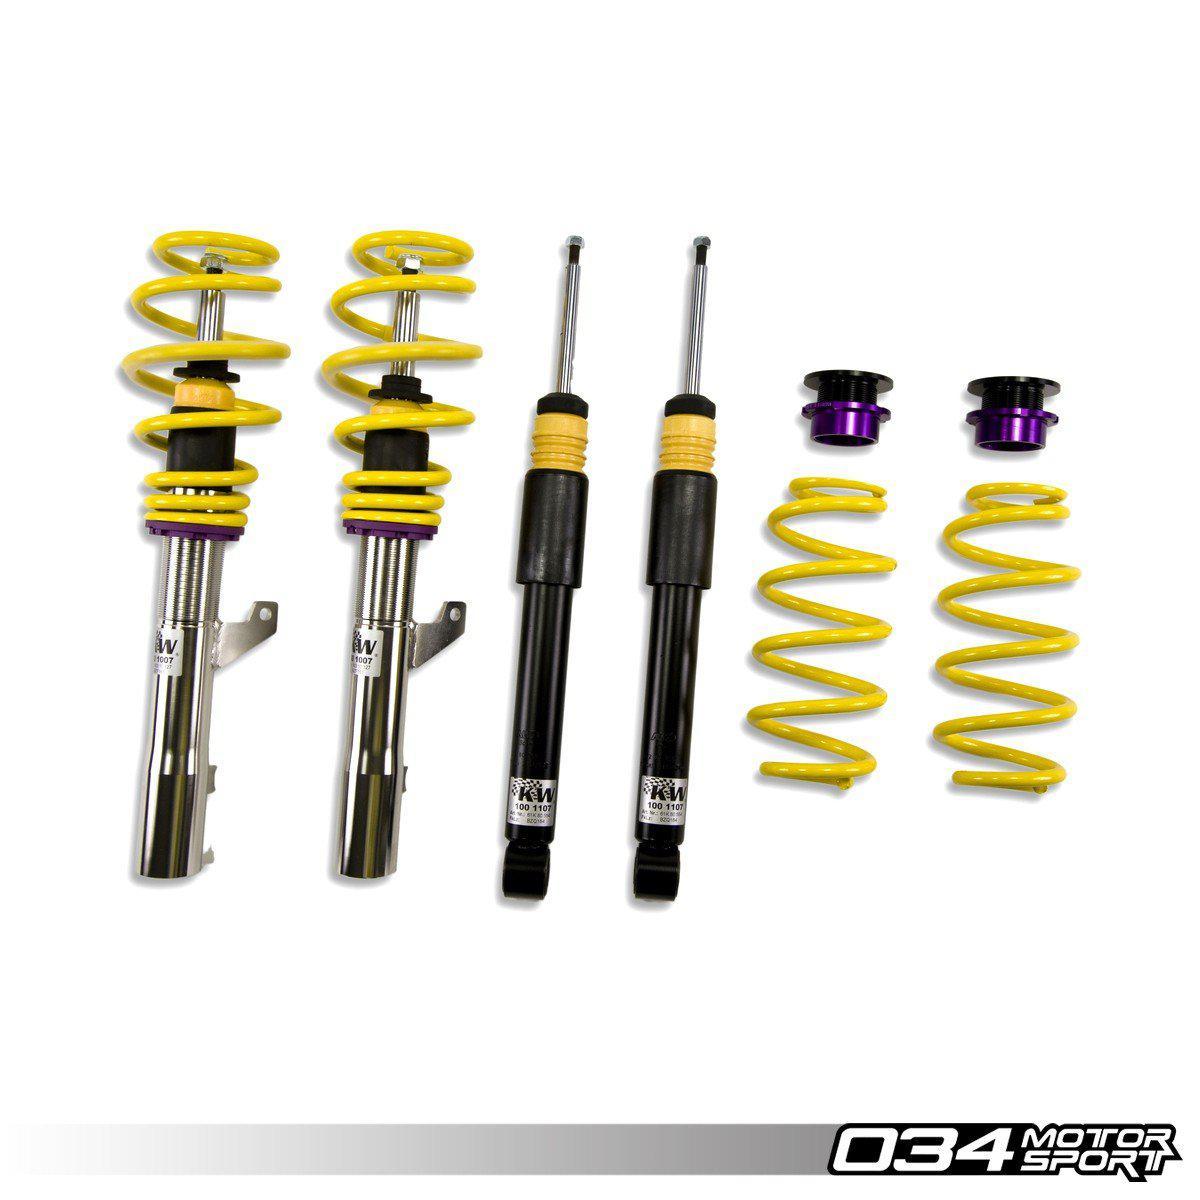 KW Variant 1 Coilover Suspension, 8p Audi A3 Quattro & B6/B7 Volkswagen Passat Without Edc-A Little Tuning Co